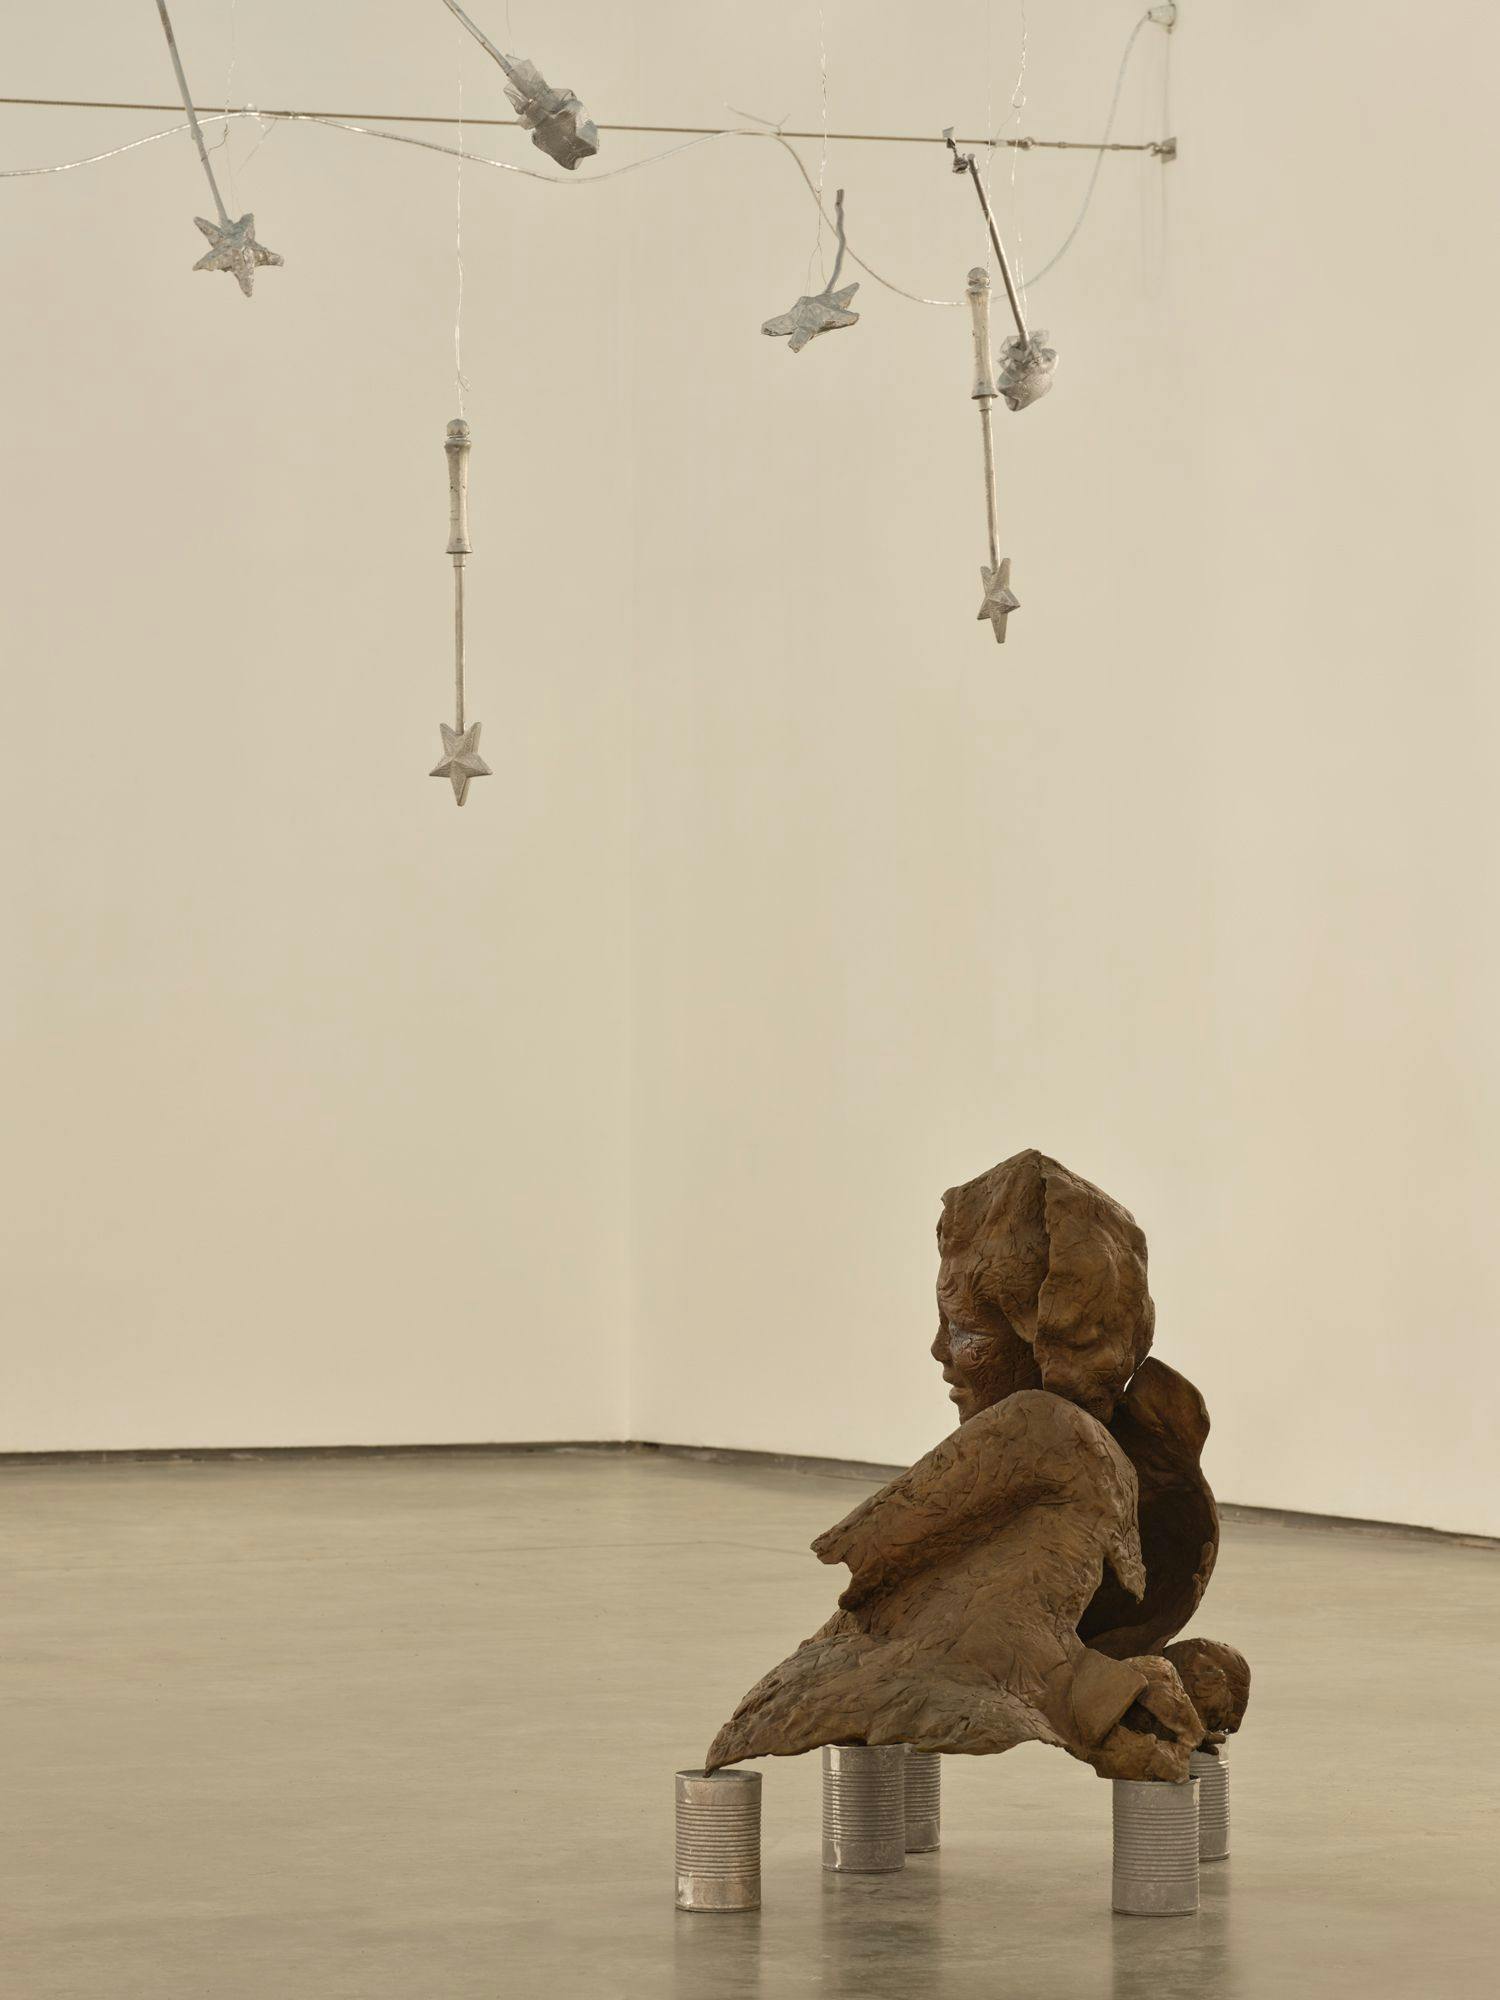 A bronze sculpture of a partial human figure sits on aluminum cans on a concrete floor. Above, silver magic wands hang from wire.